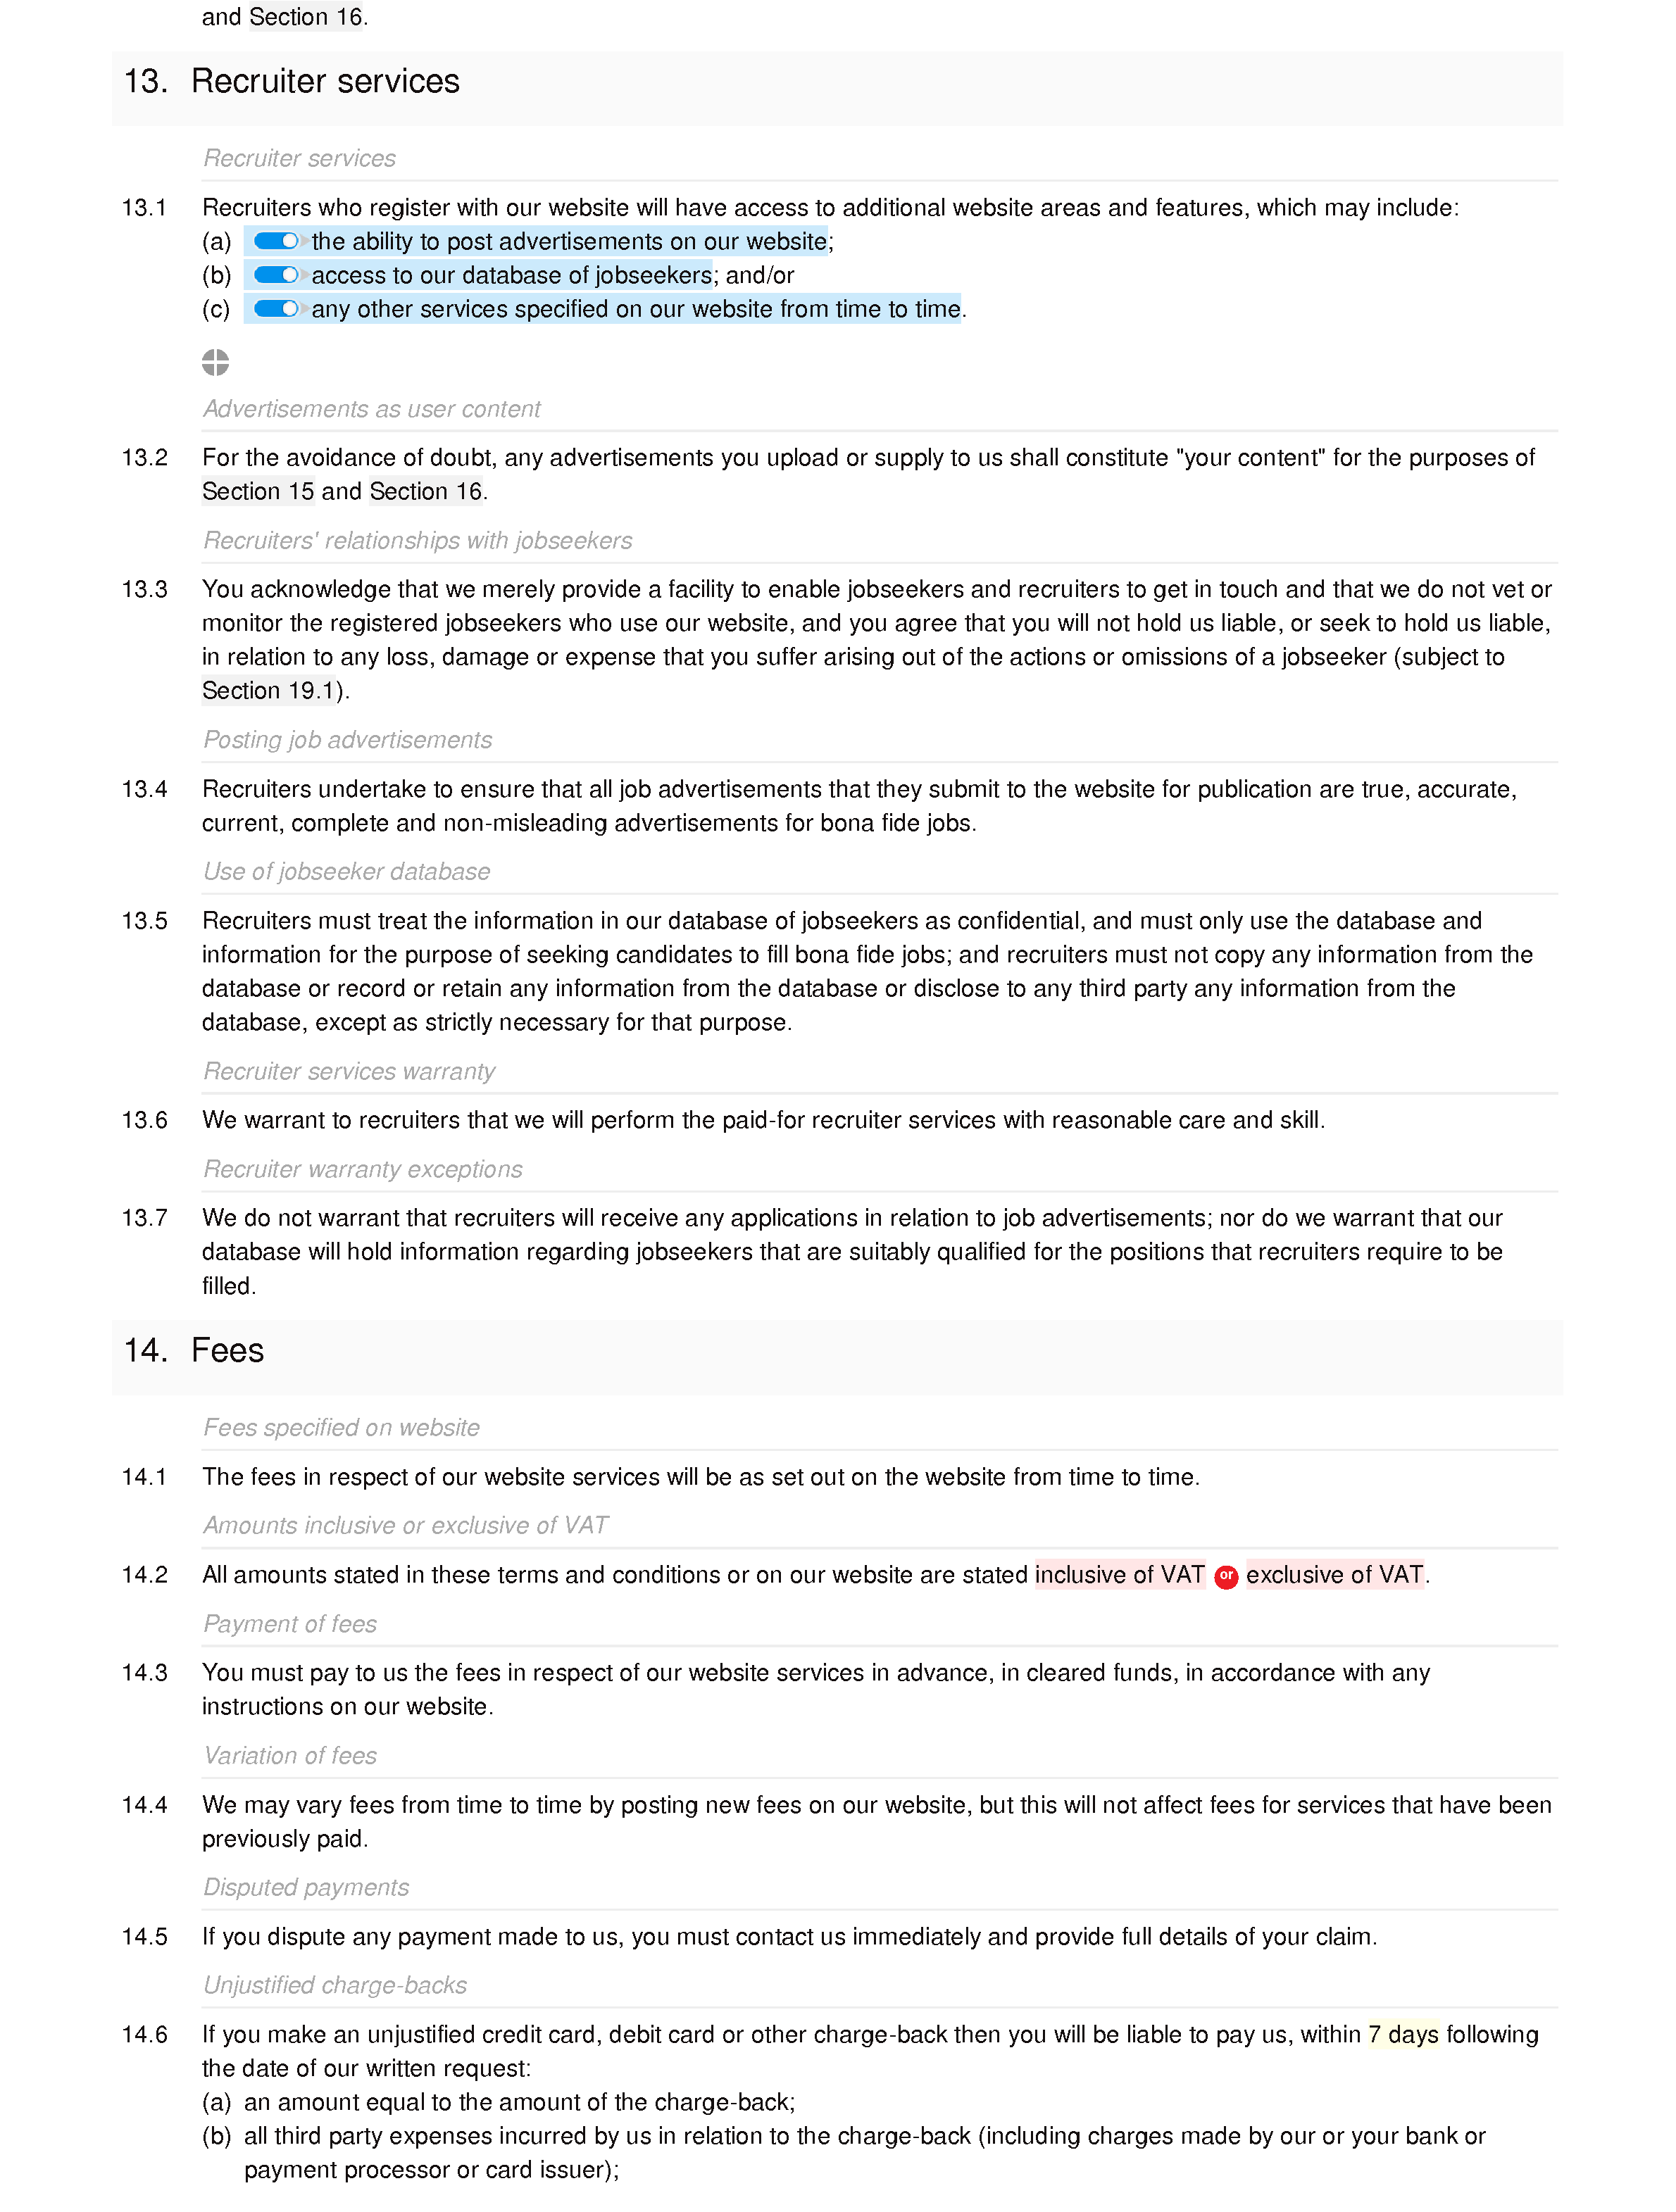 Social recruitment website terms and conditions document editor preview